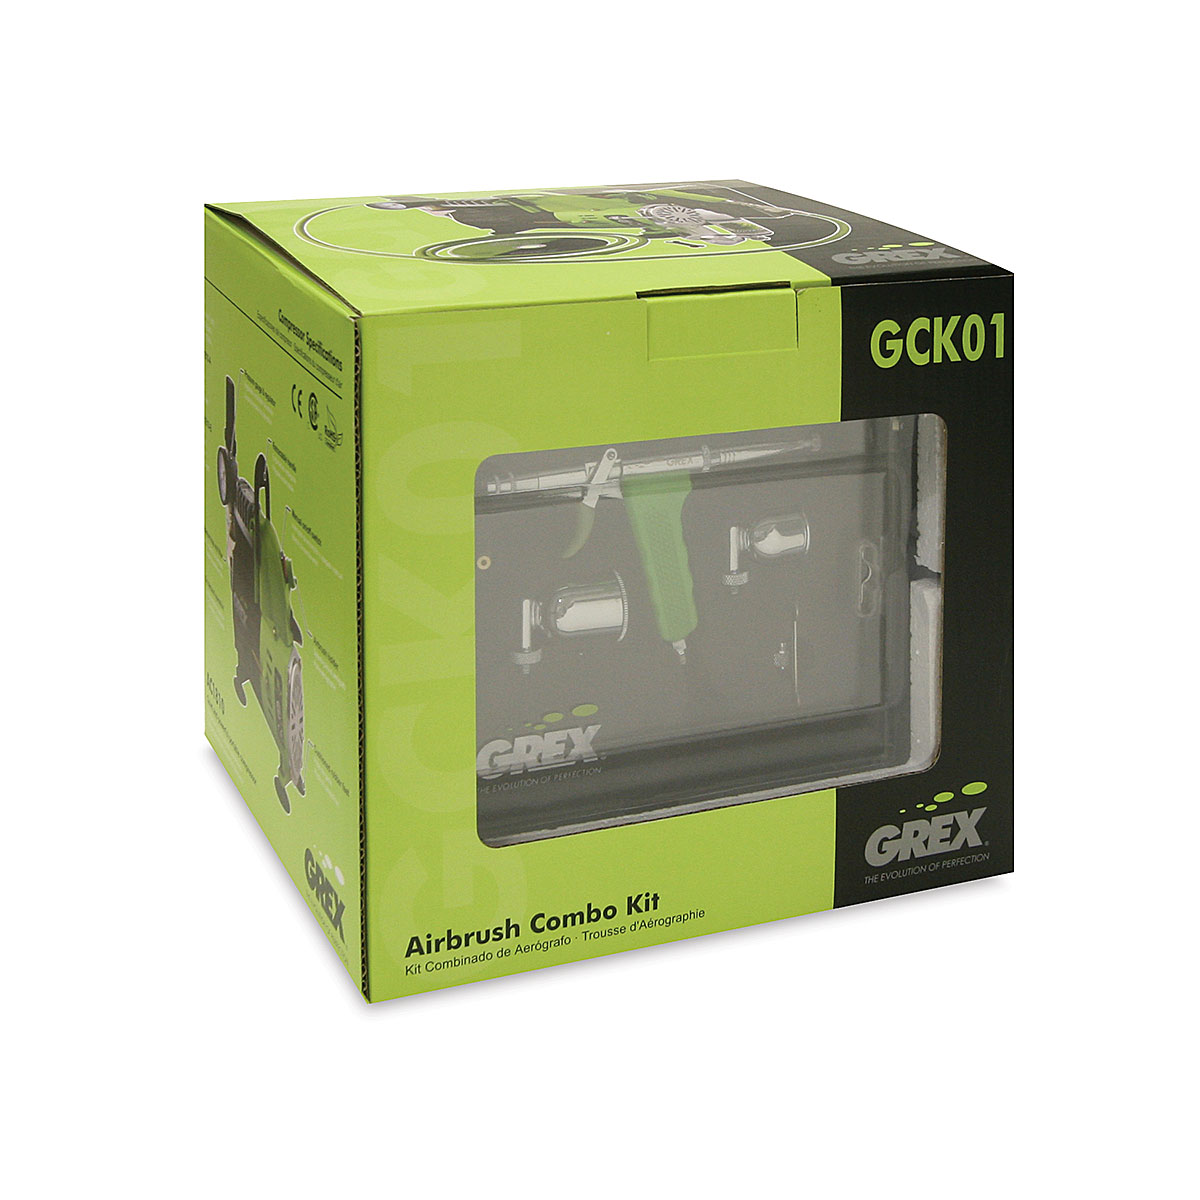 Grex Genesis Series Double Action Airbrushes